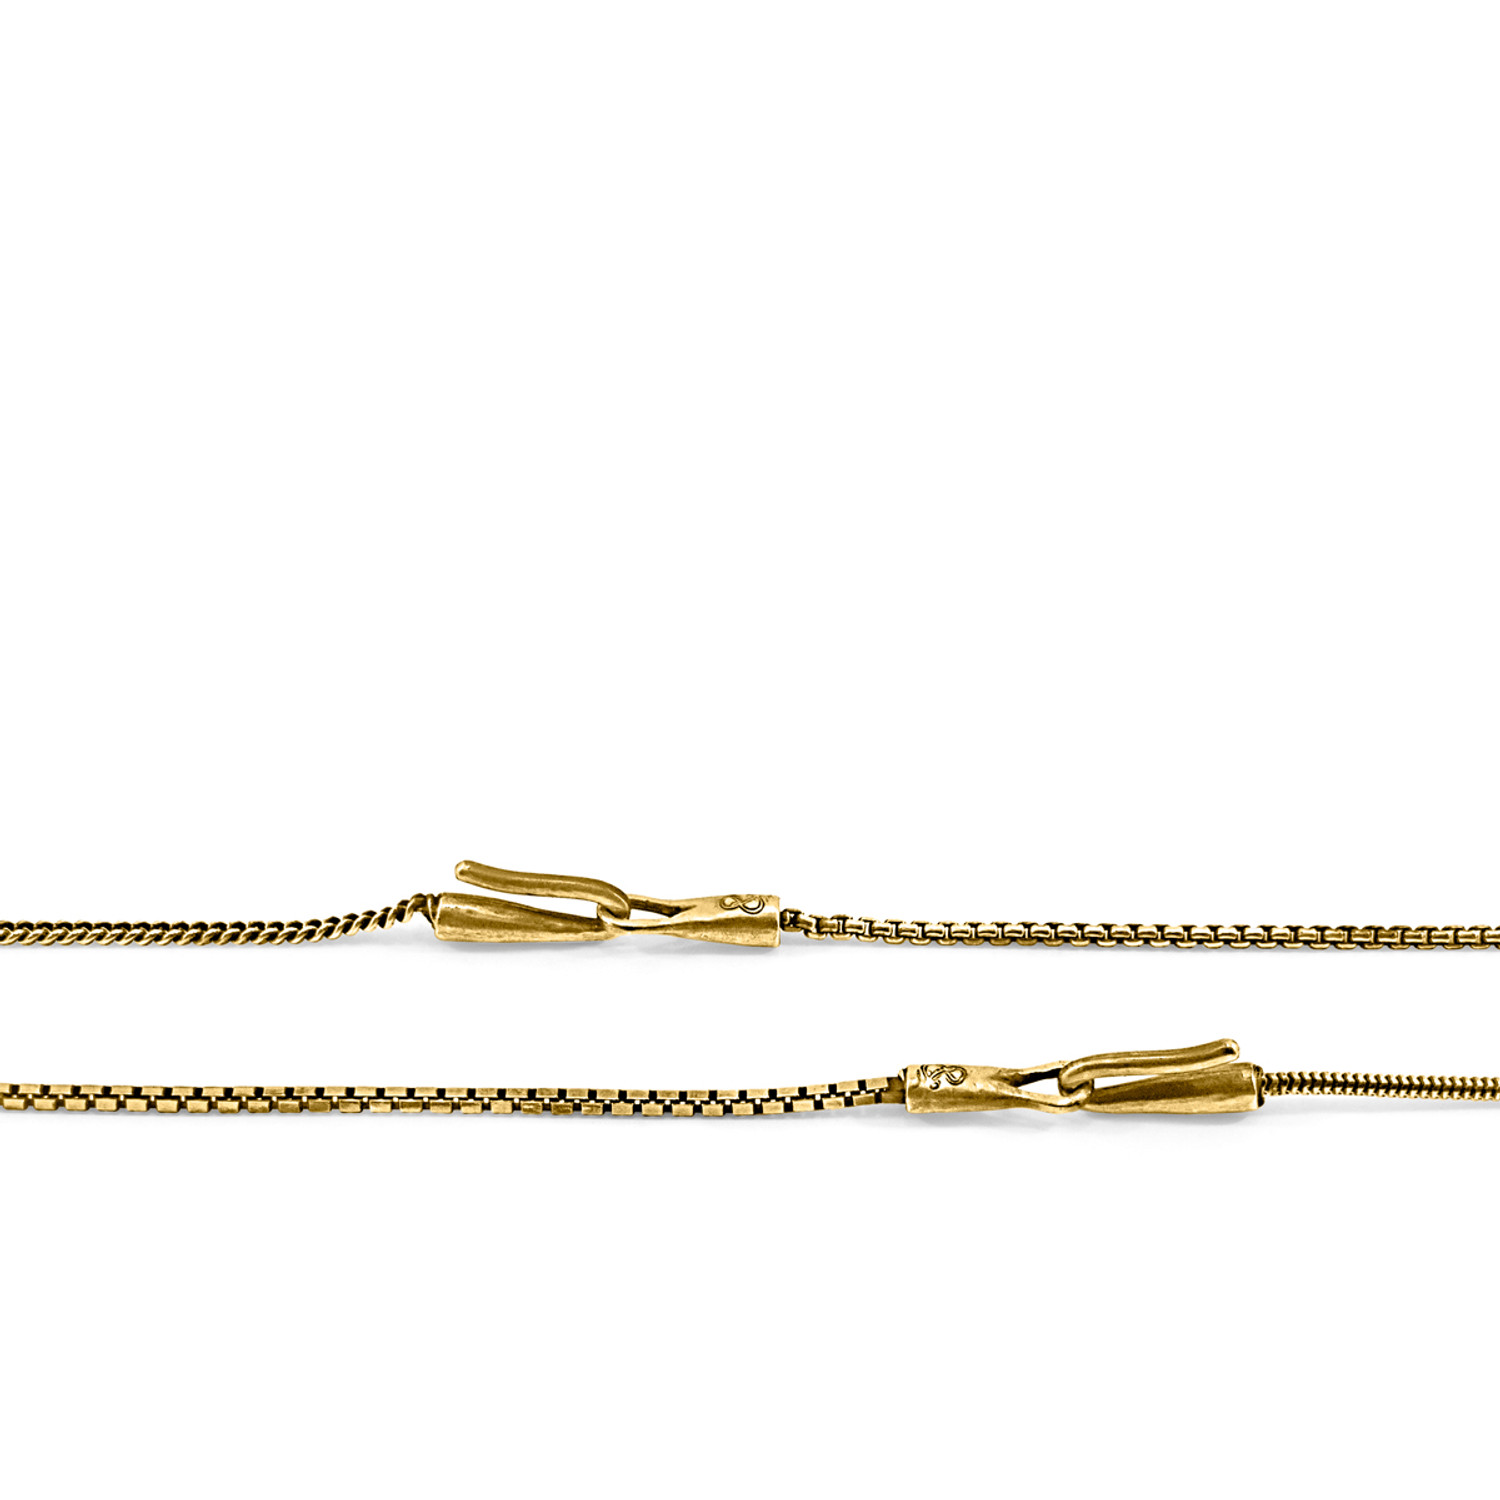 Anchor & Crew SKINNY Gold Chain Bracelet Collection